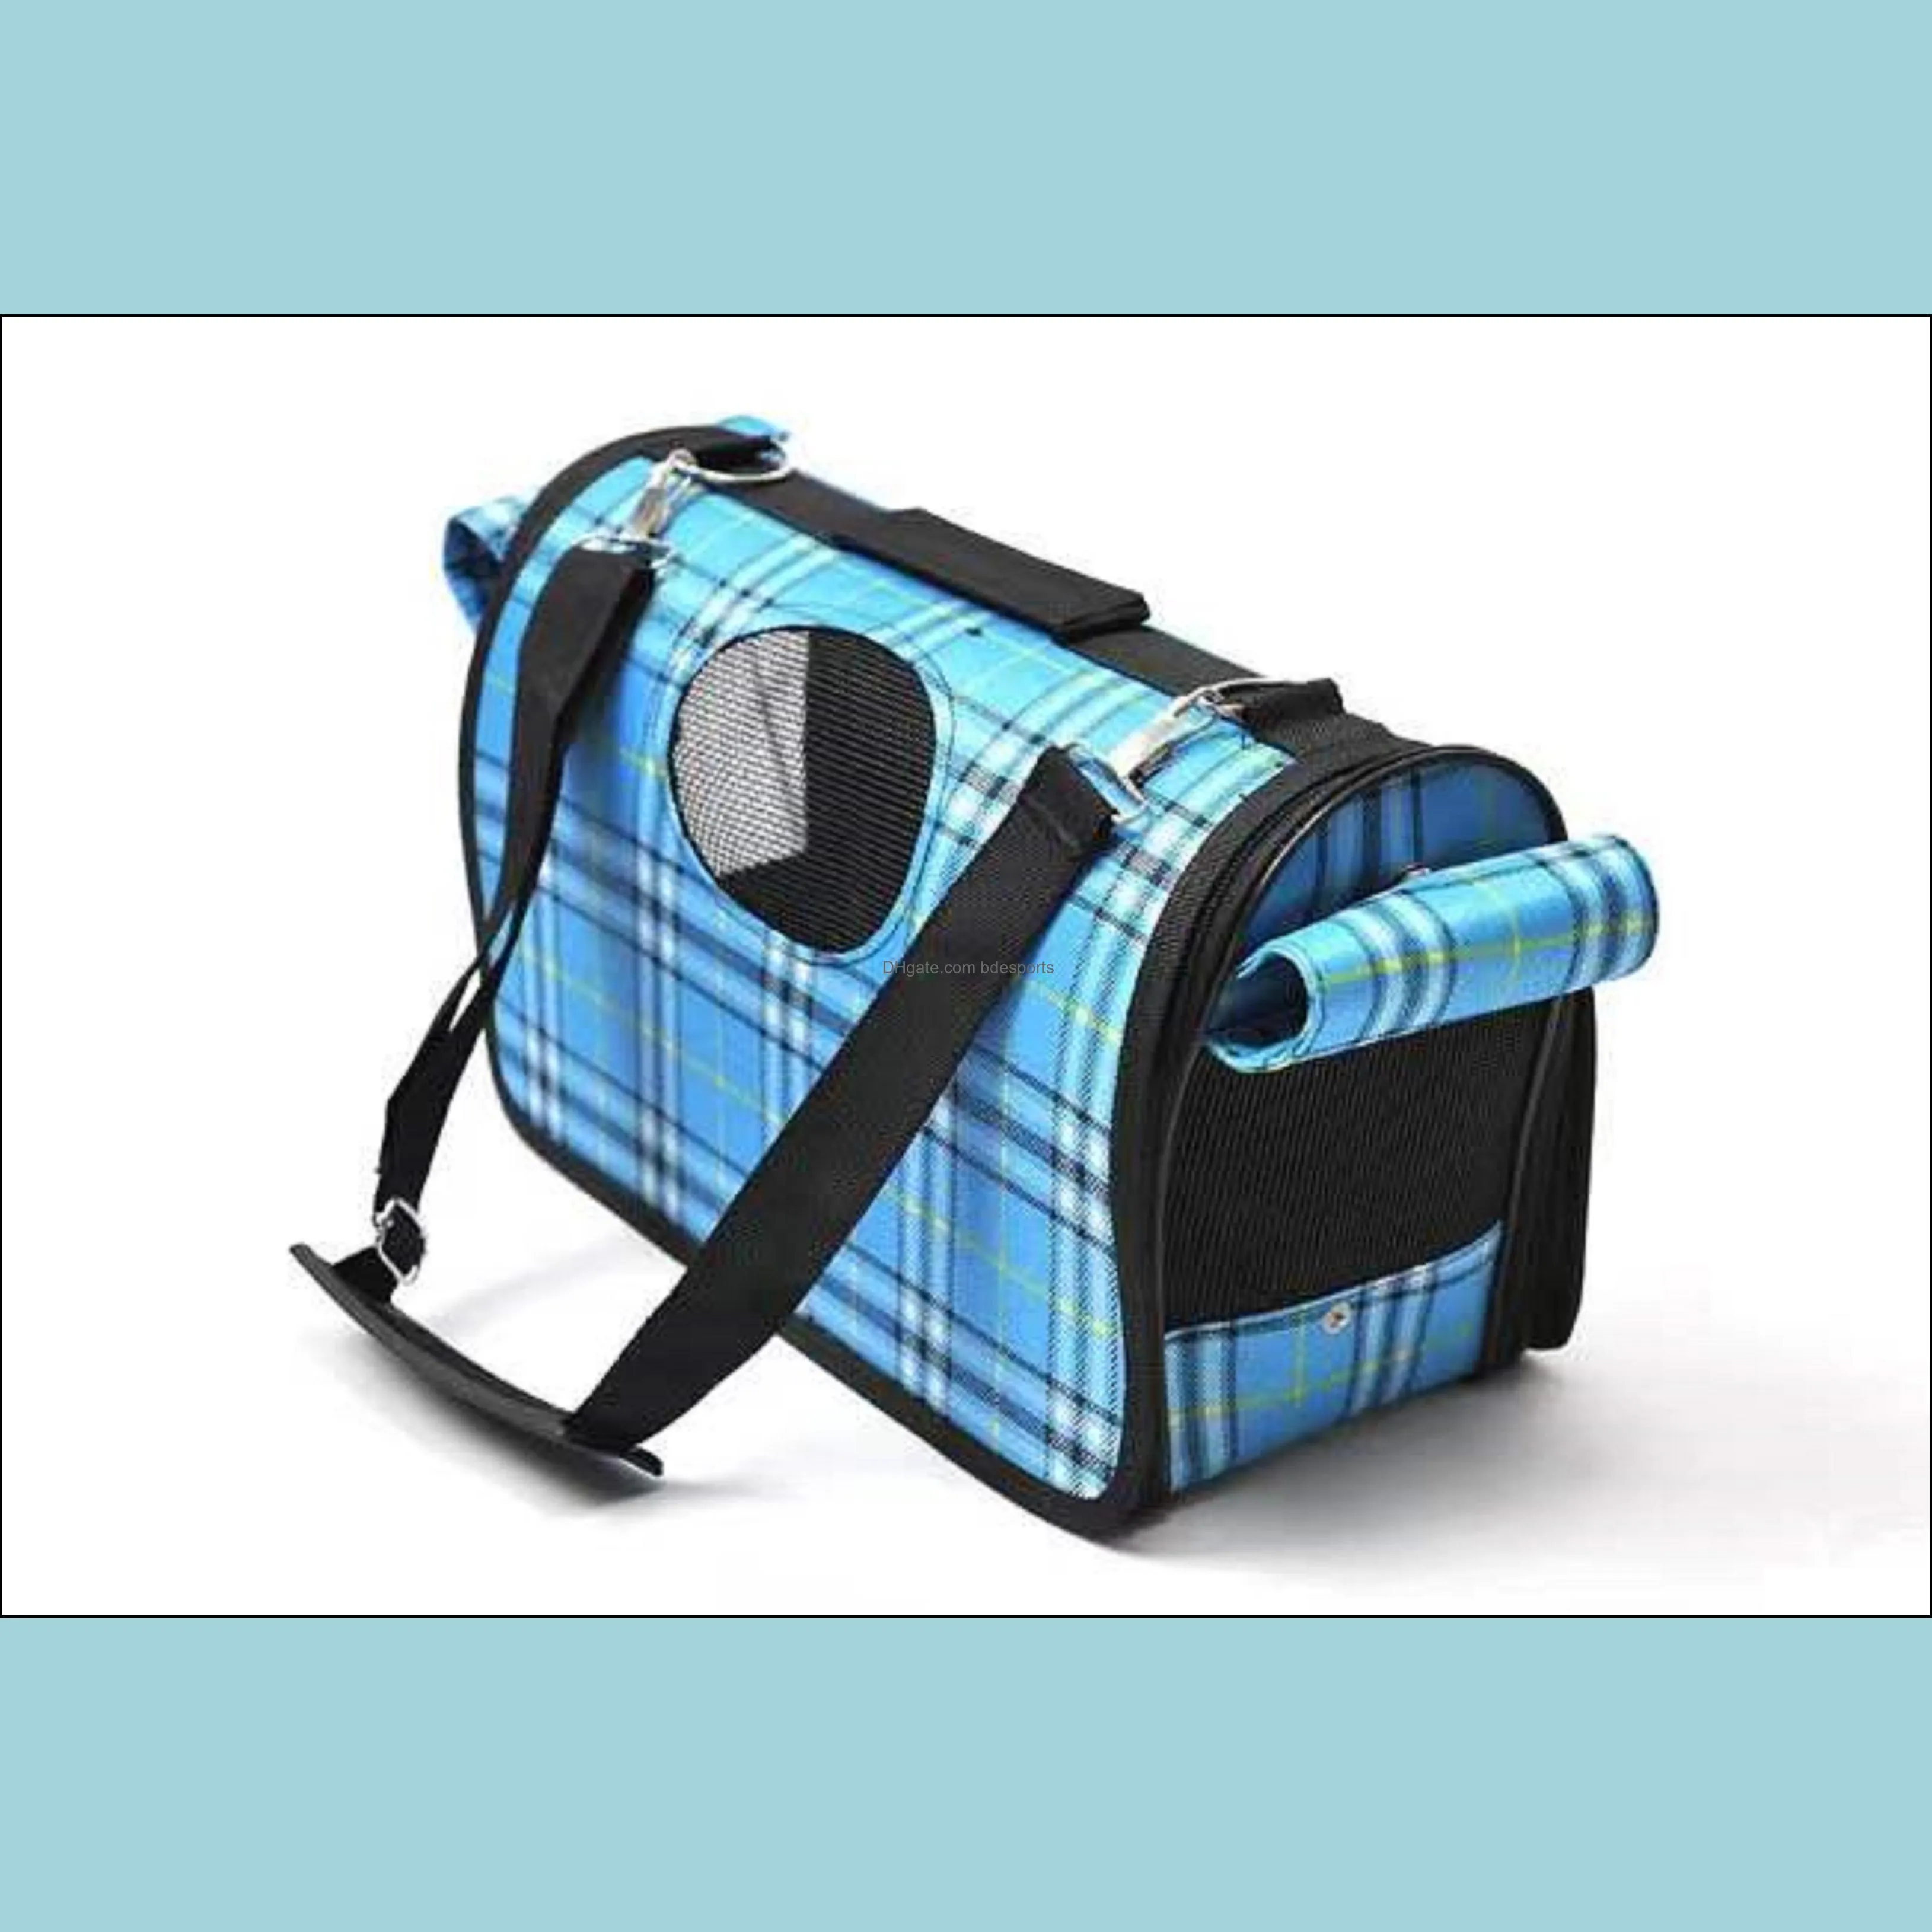 Soft Pet Carriers Portable Breathable Foldable Bag Cat Dog Carrier Bags Outgoing Travel Pets Handbag with Locking Safety Zippers